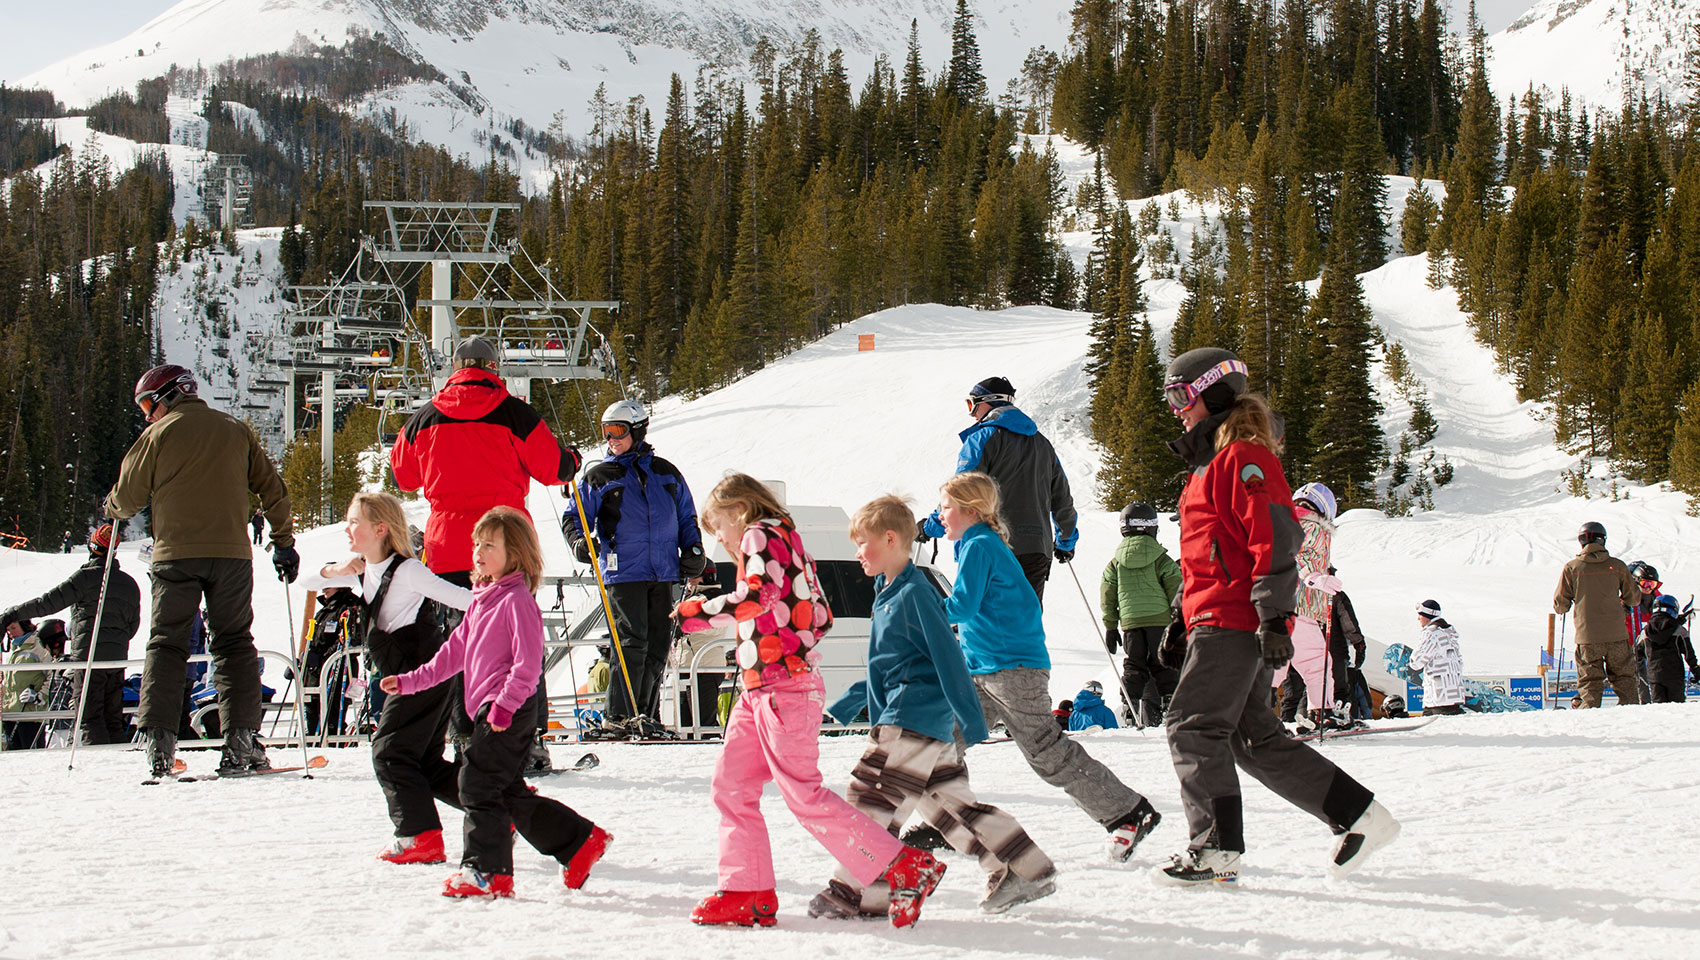 group of people at the ski slopes